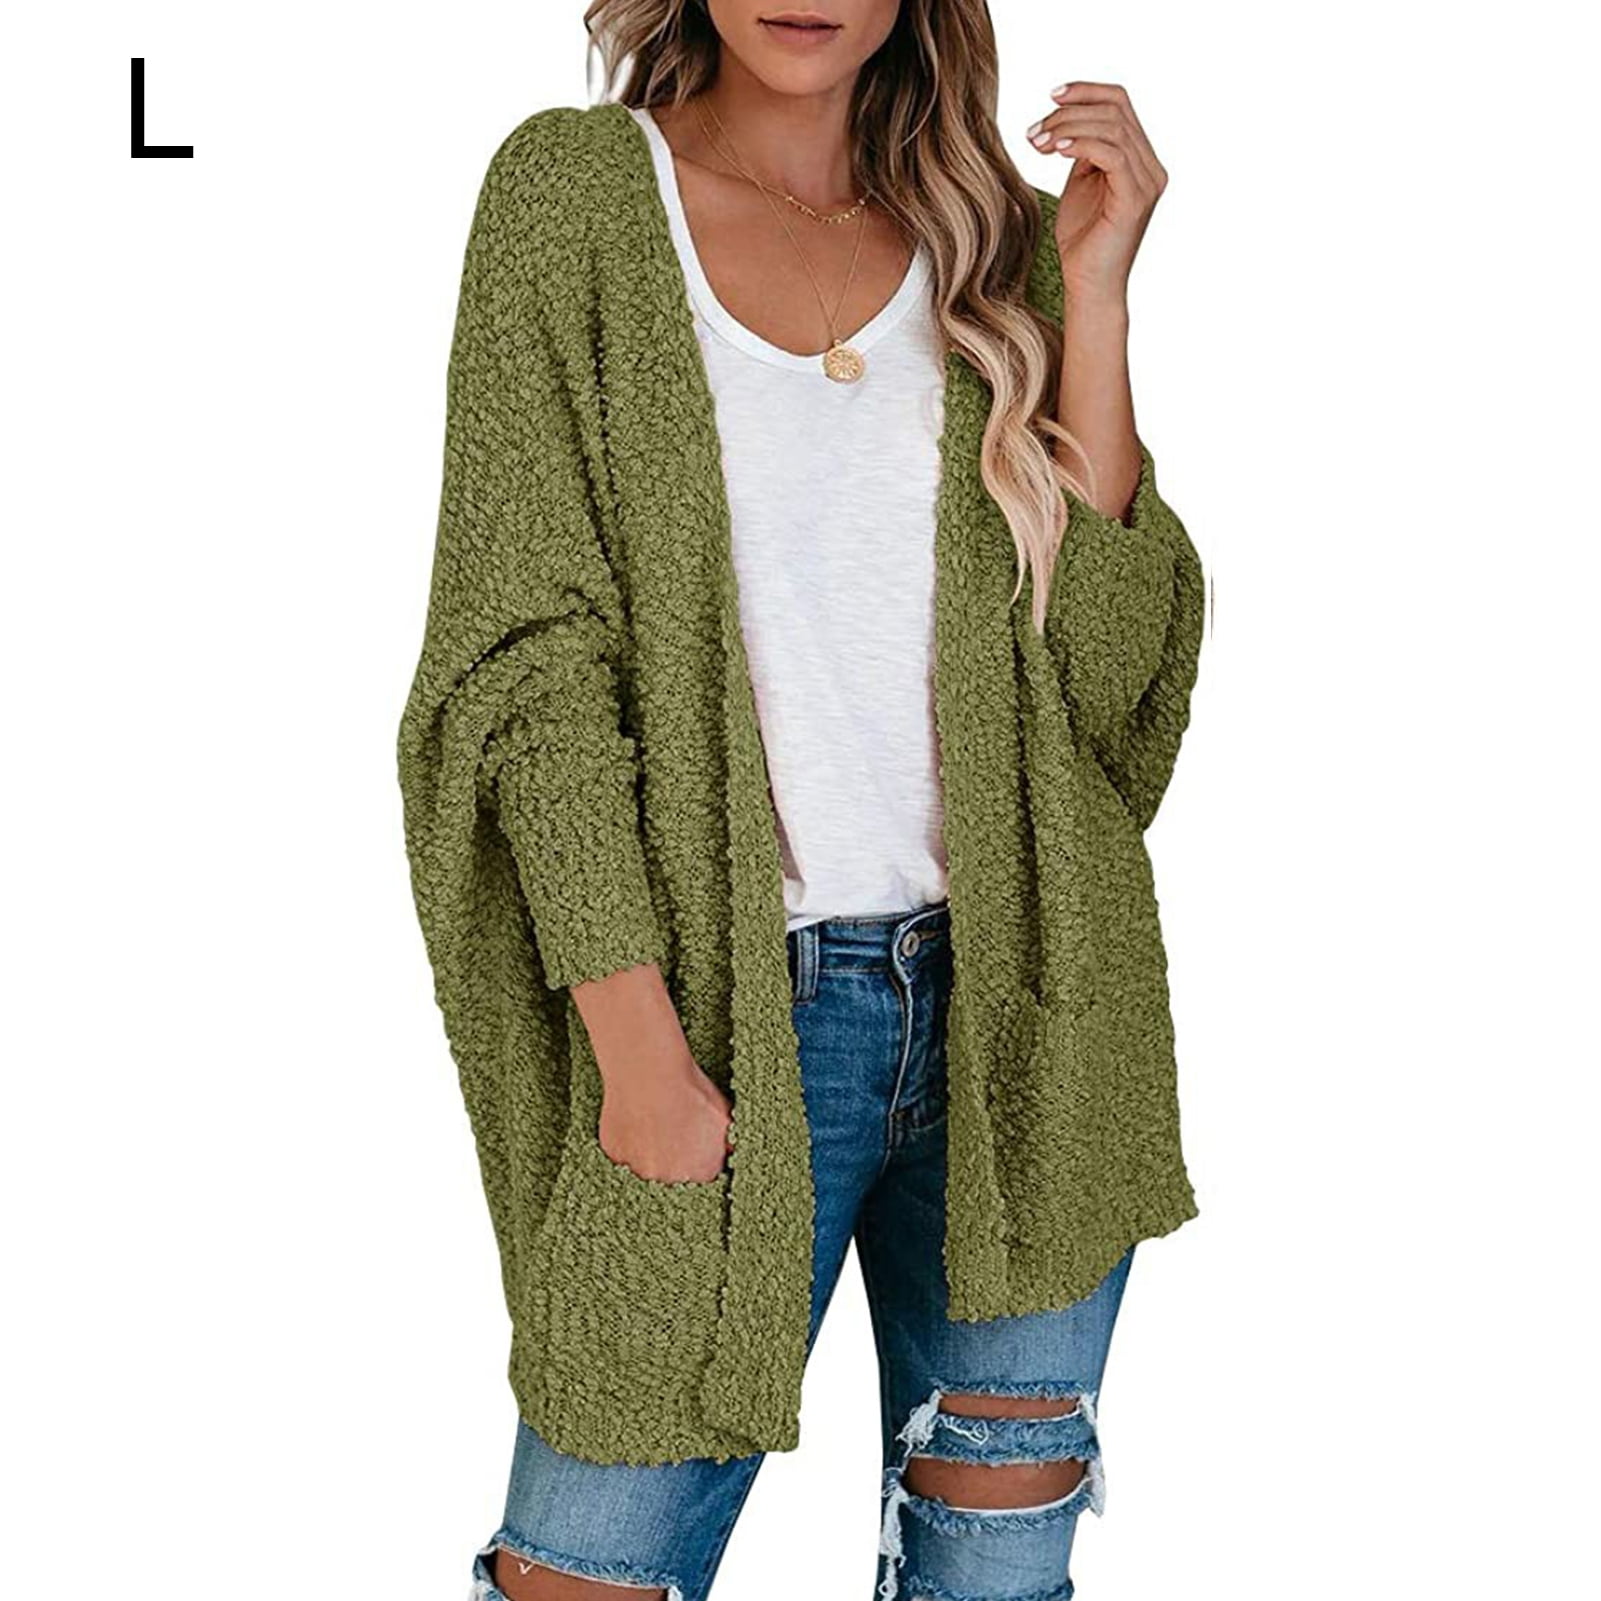 YNALIY Womens Cable Knit Chunky Cardigans Open Front Long Sleeve Sweater Blouse Tops 